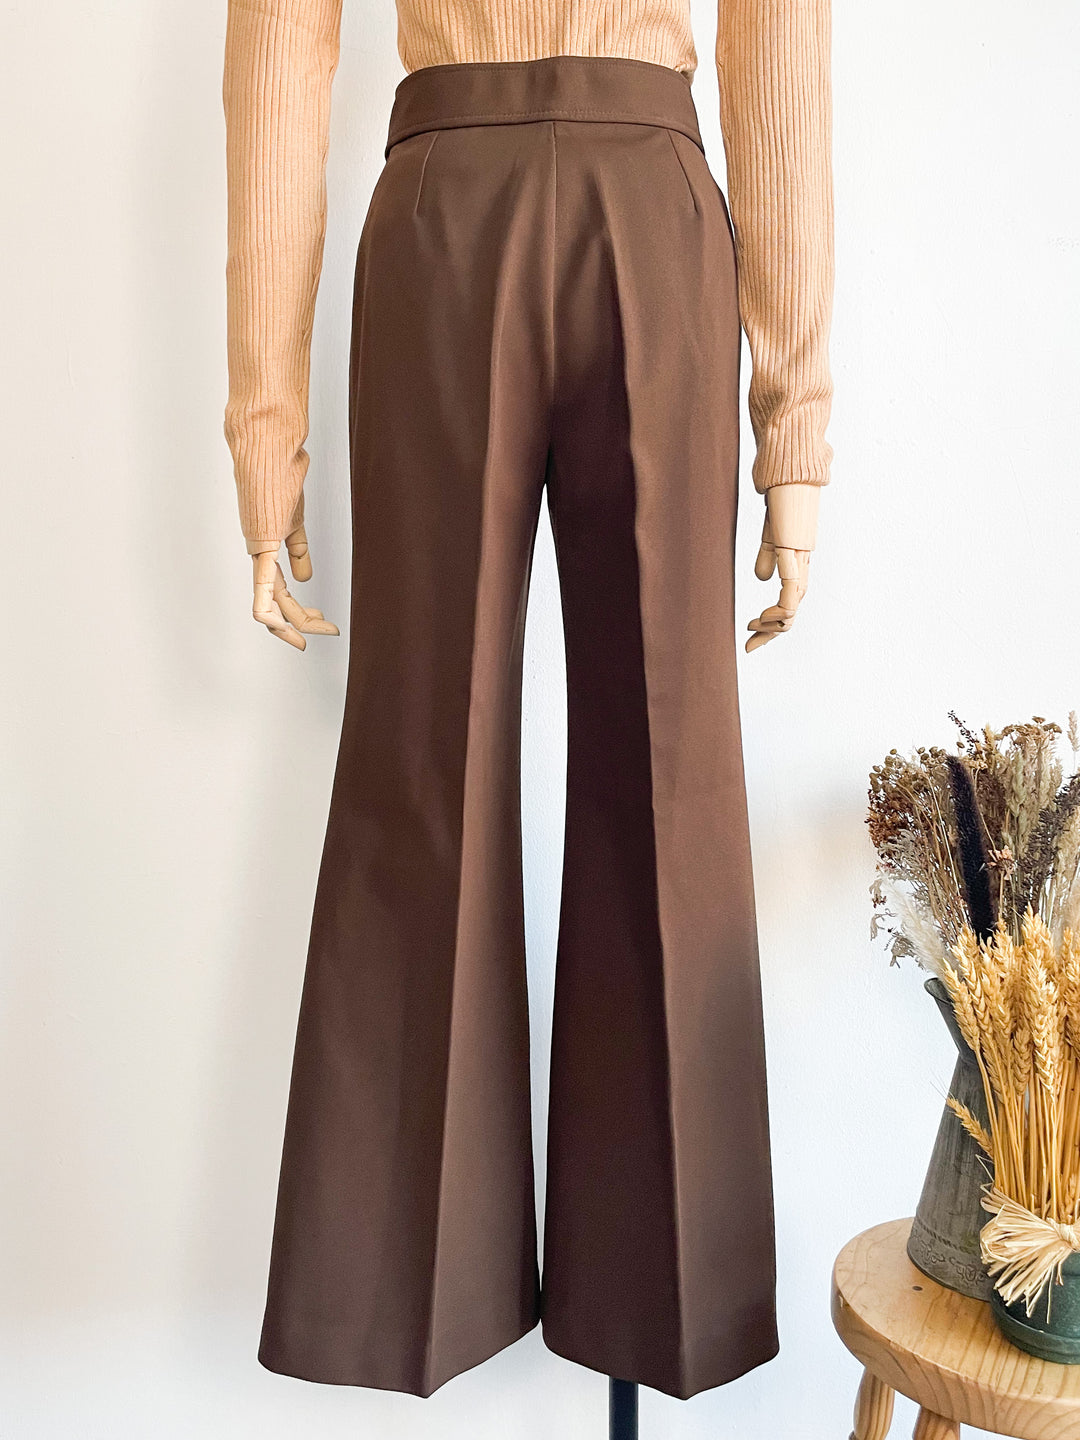 The Chocolate 70s Flares